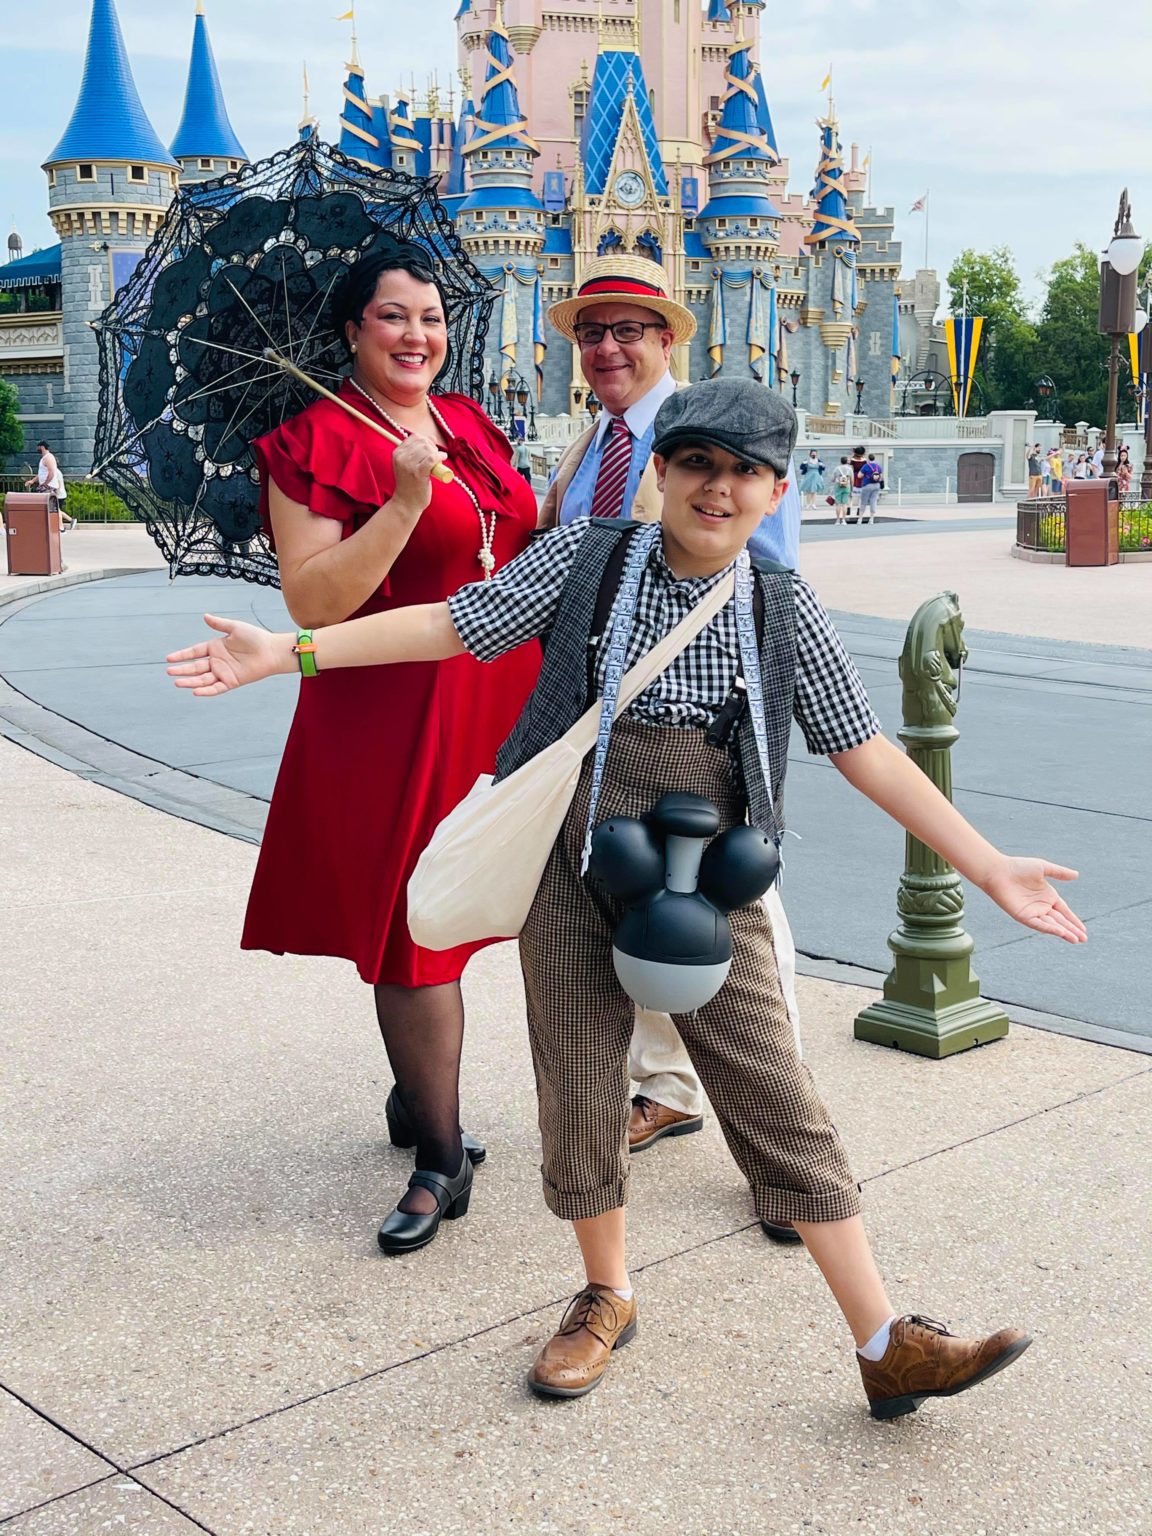 Get a First Look At This Year's Dapper Day Outfits At Disney World